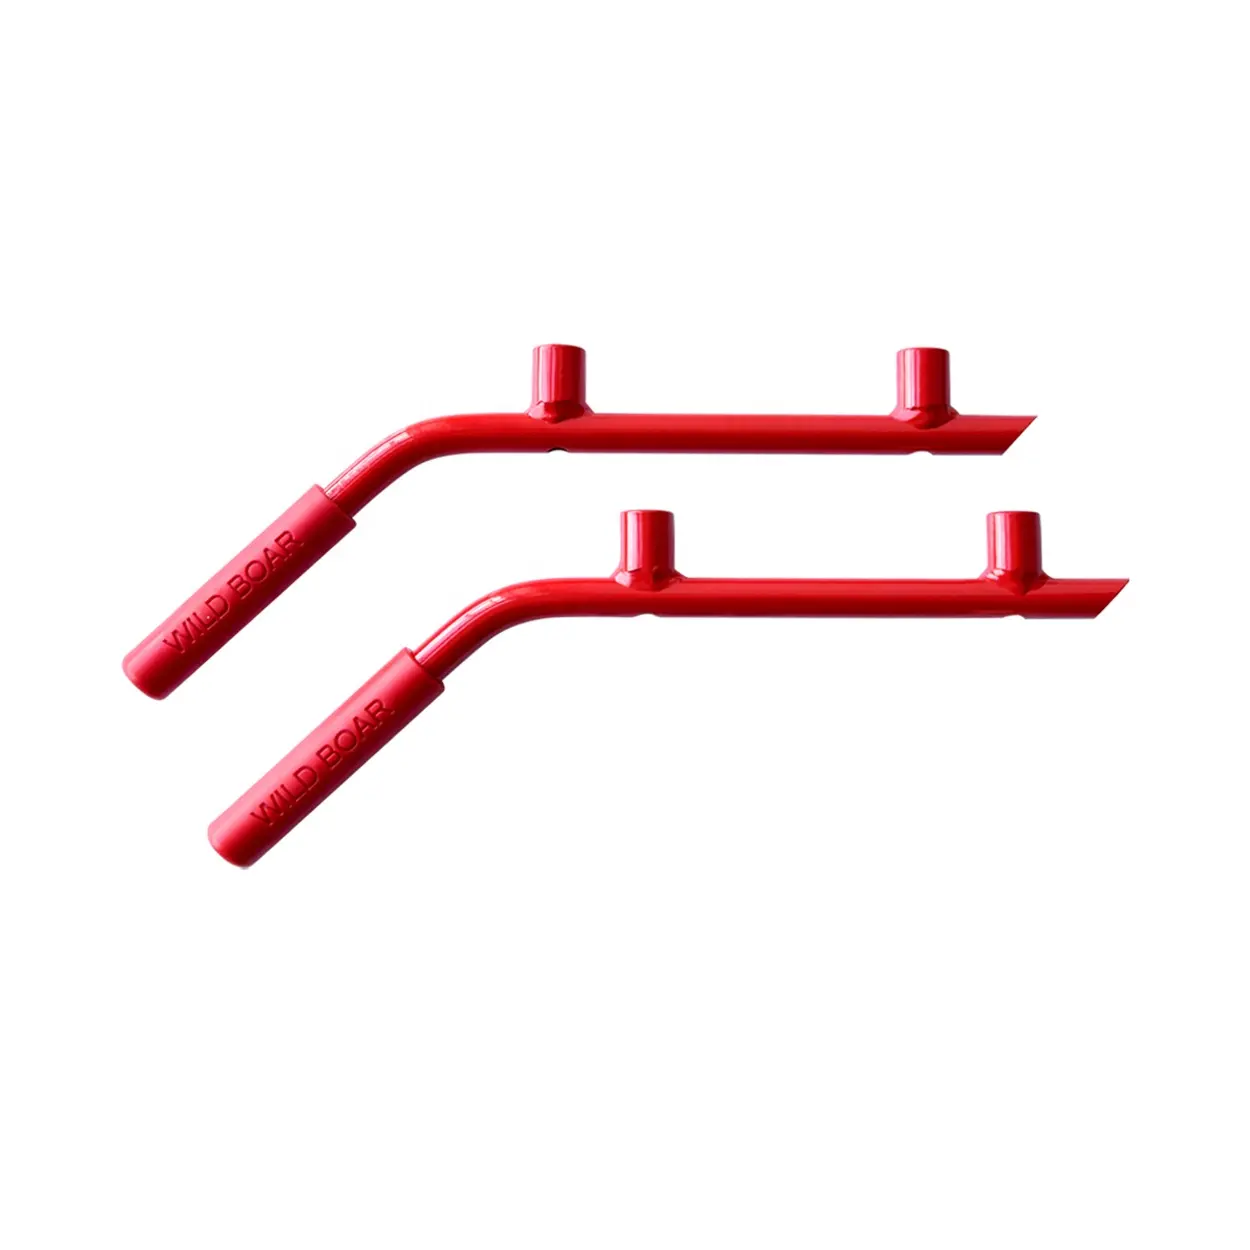 Red Rear Bar Grab Handle For jeep wrangler jk accessories 2007-2018 Steel Car Accessories